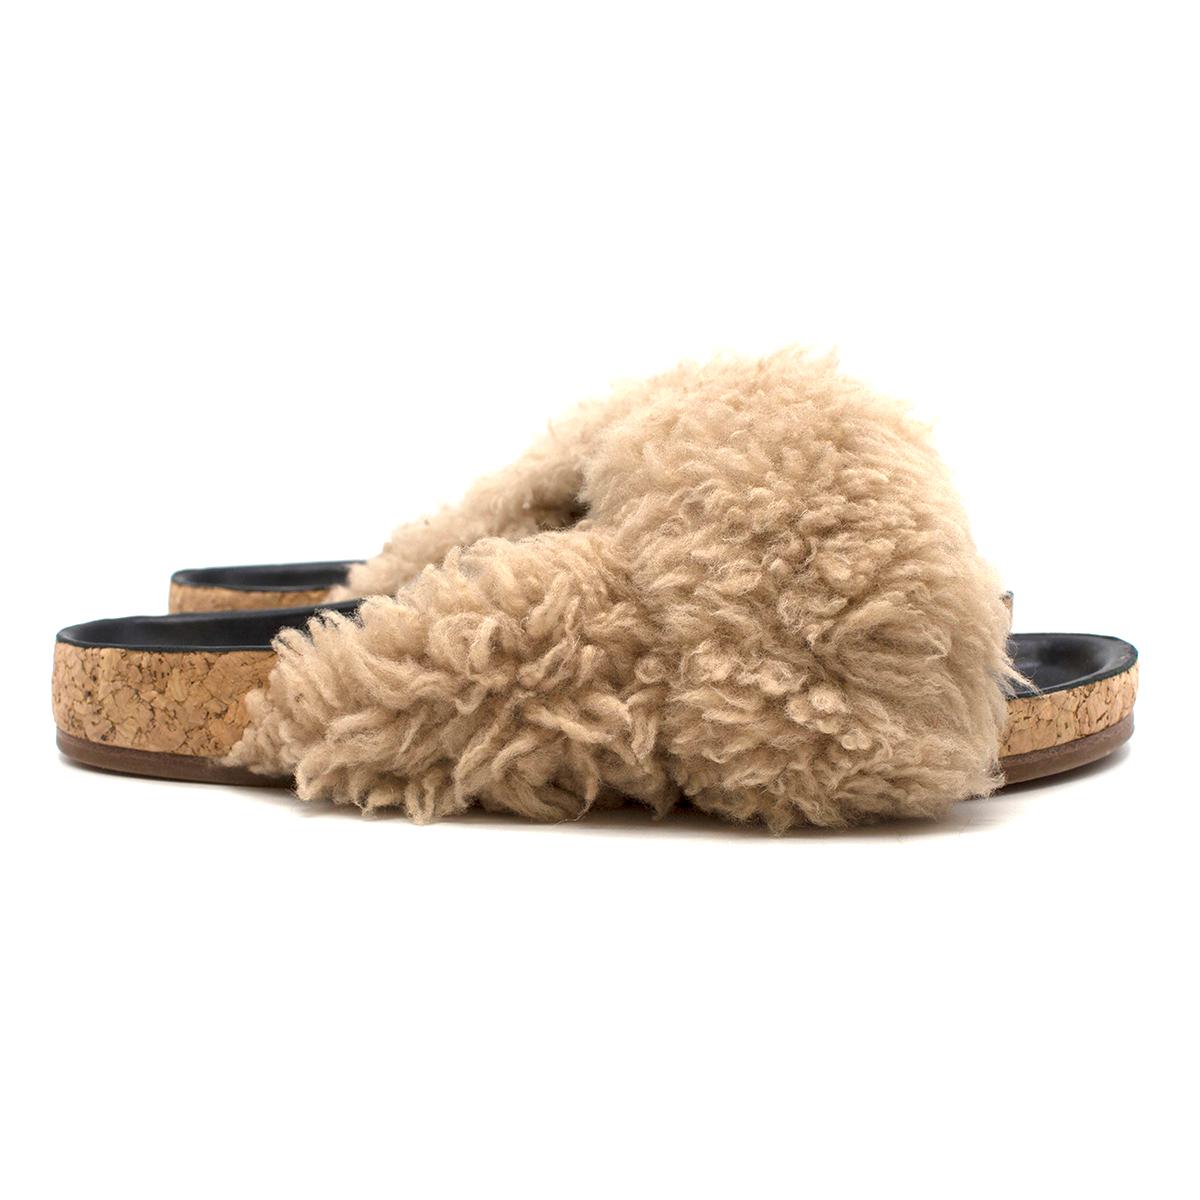 Chloe Shearling Fur Flat Slide Sandal

-Shearling slides
-Flat cork soles
-Open toe
-Leather insole

Please note, these items are pre-owned and may show signs of being stored even when unworn and unused. This is reflected within the significantly